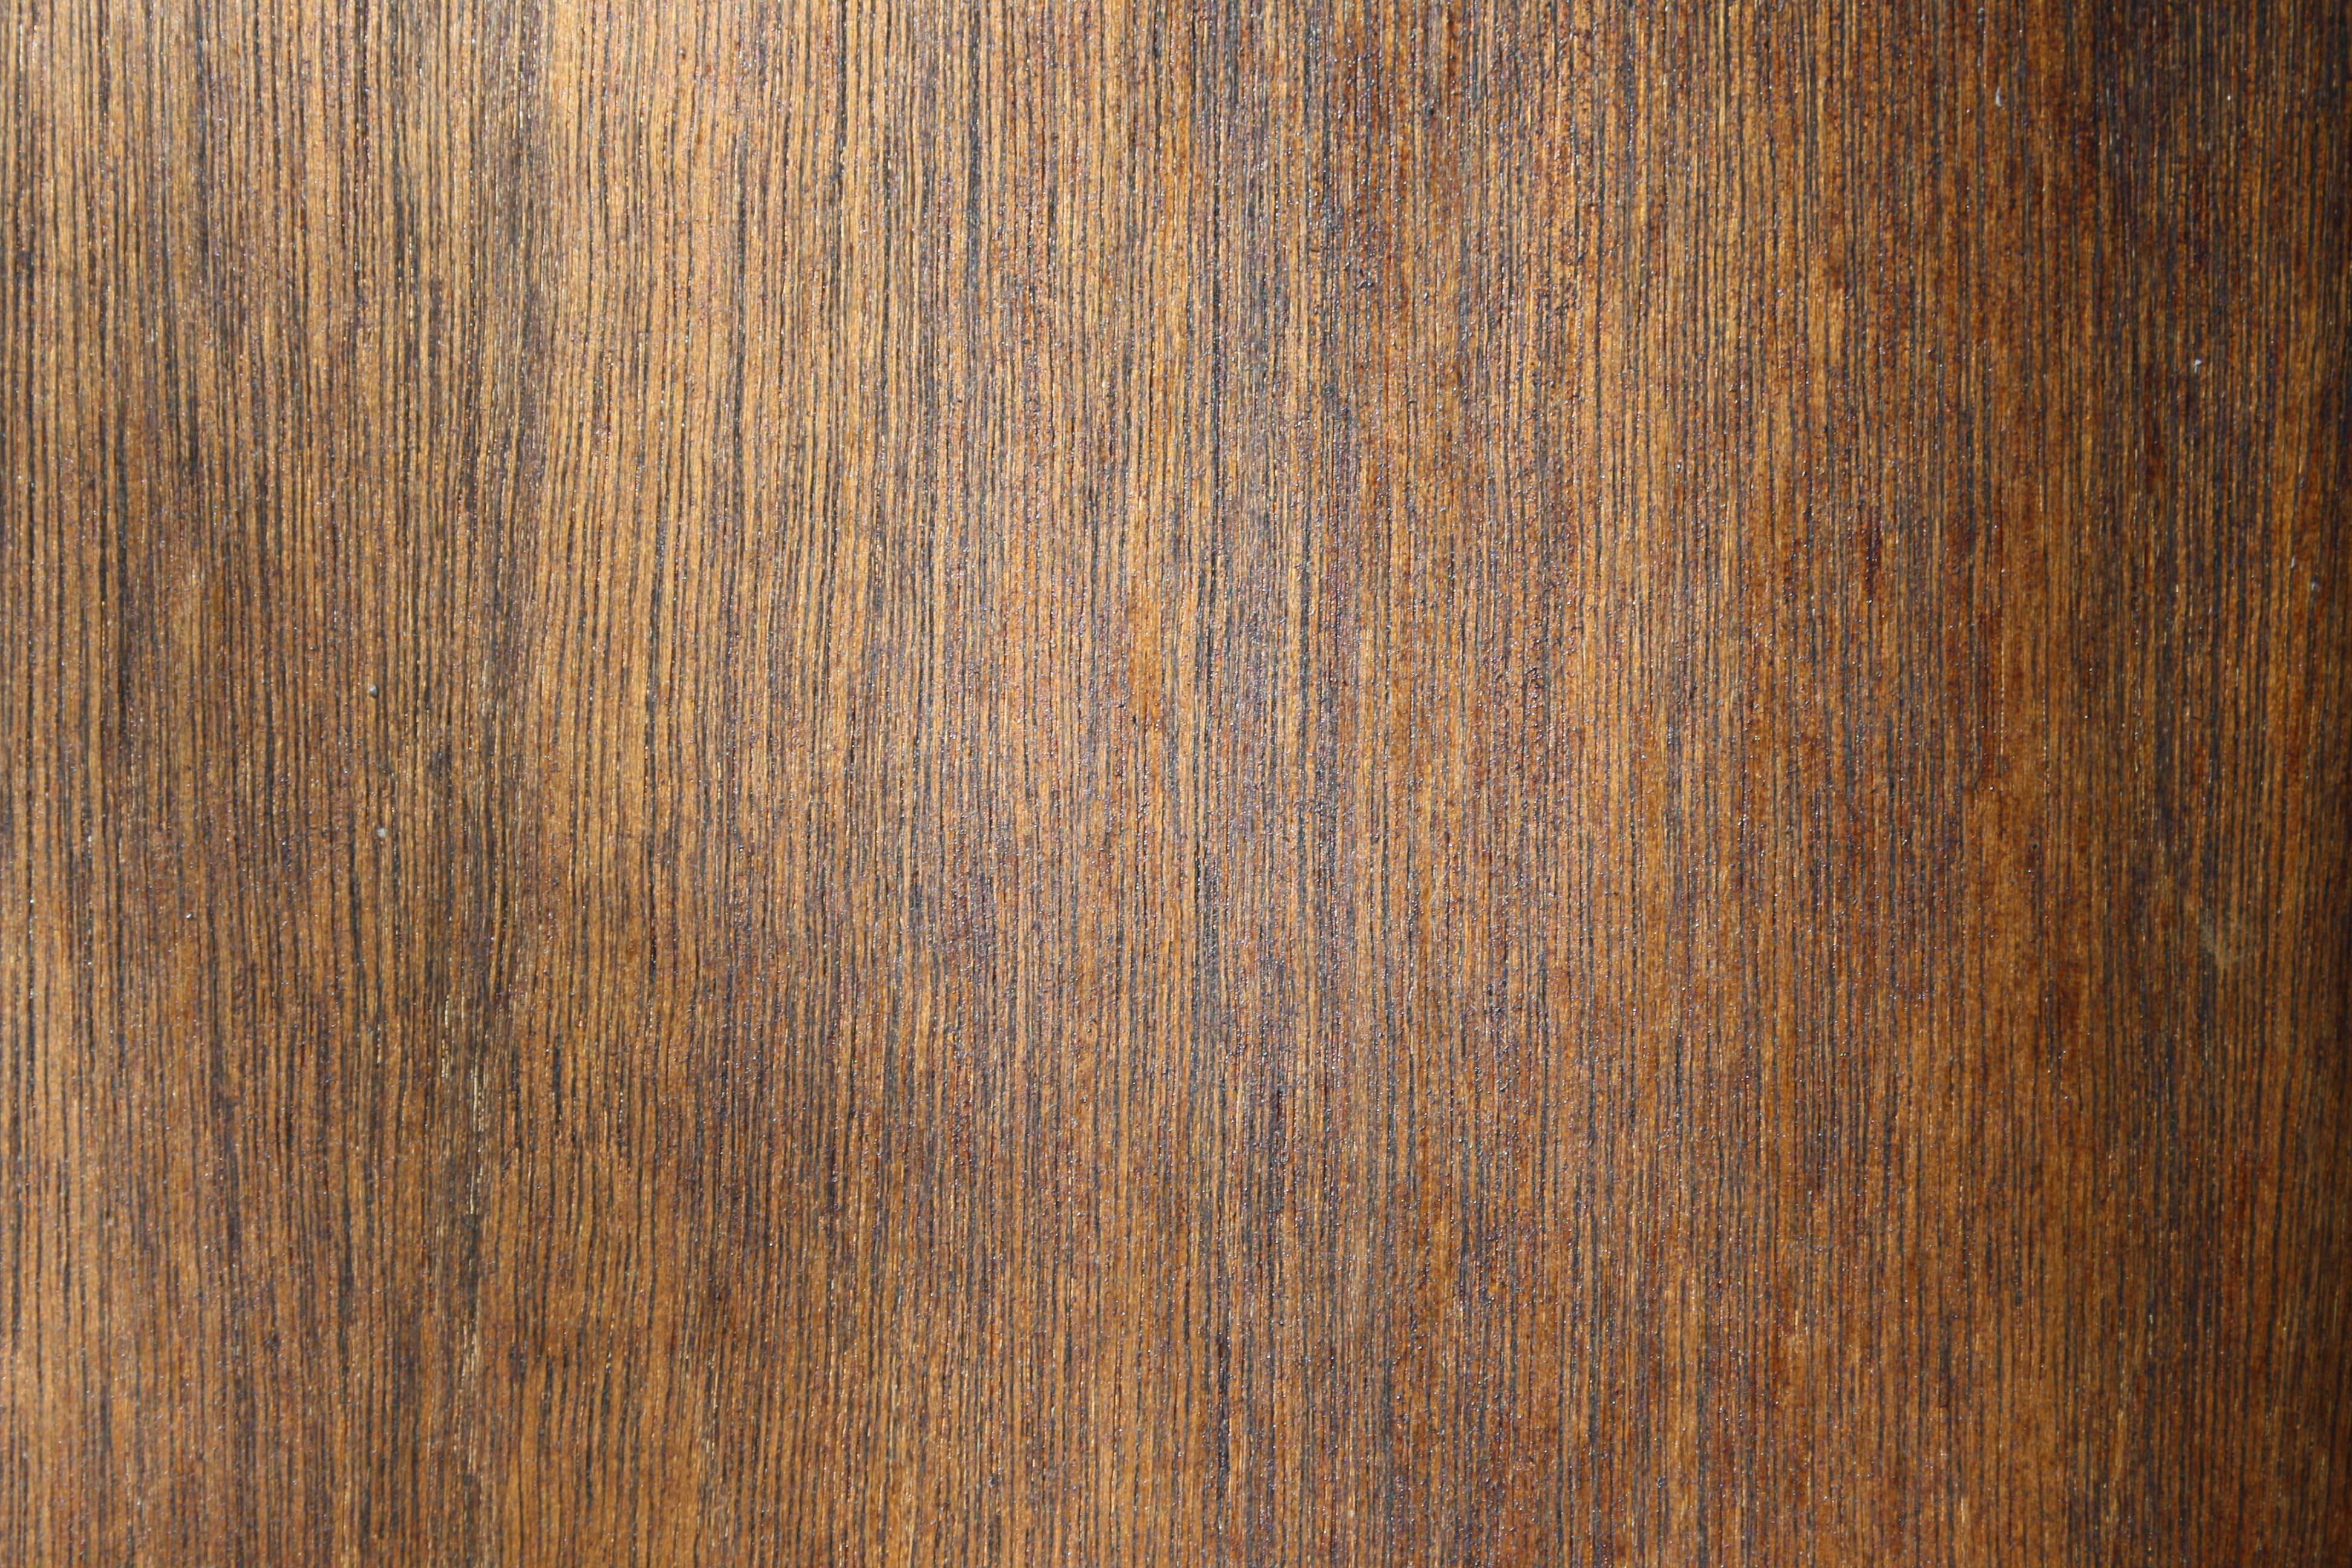 Wood with Walnut Stain Texture Picture Free Photograph Photos